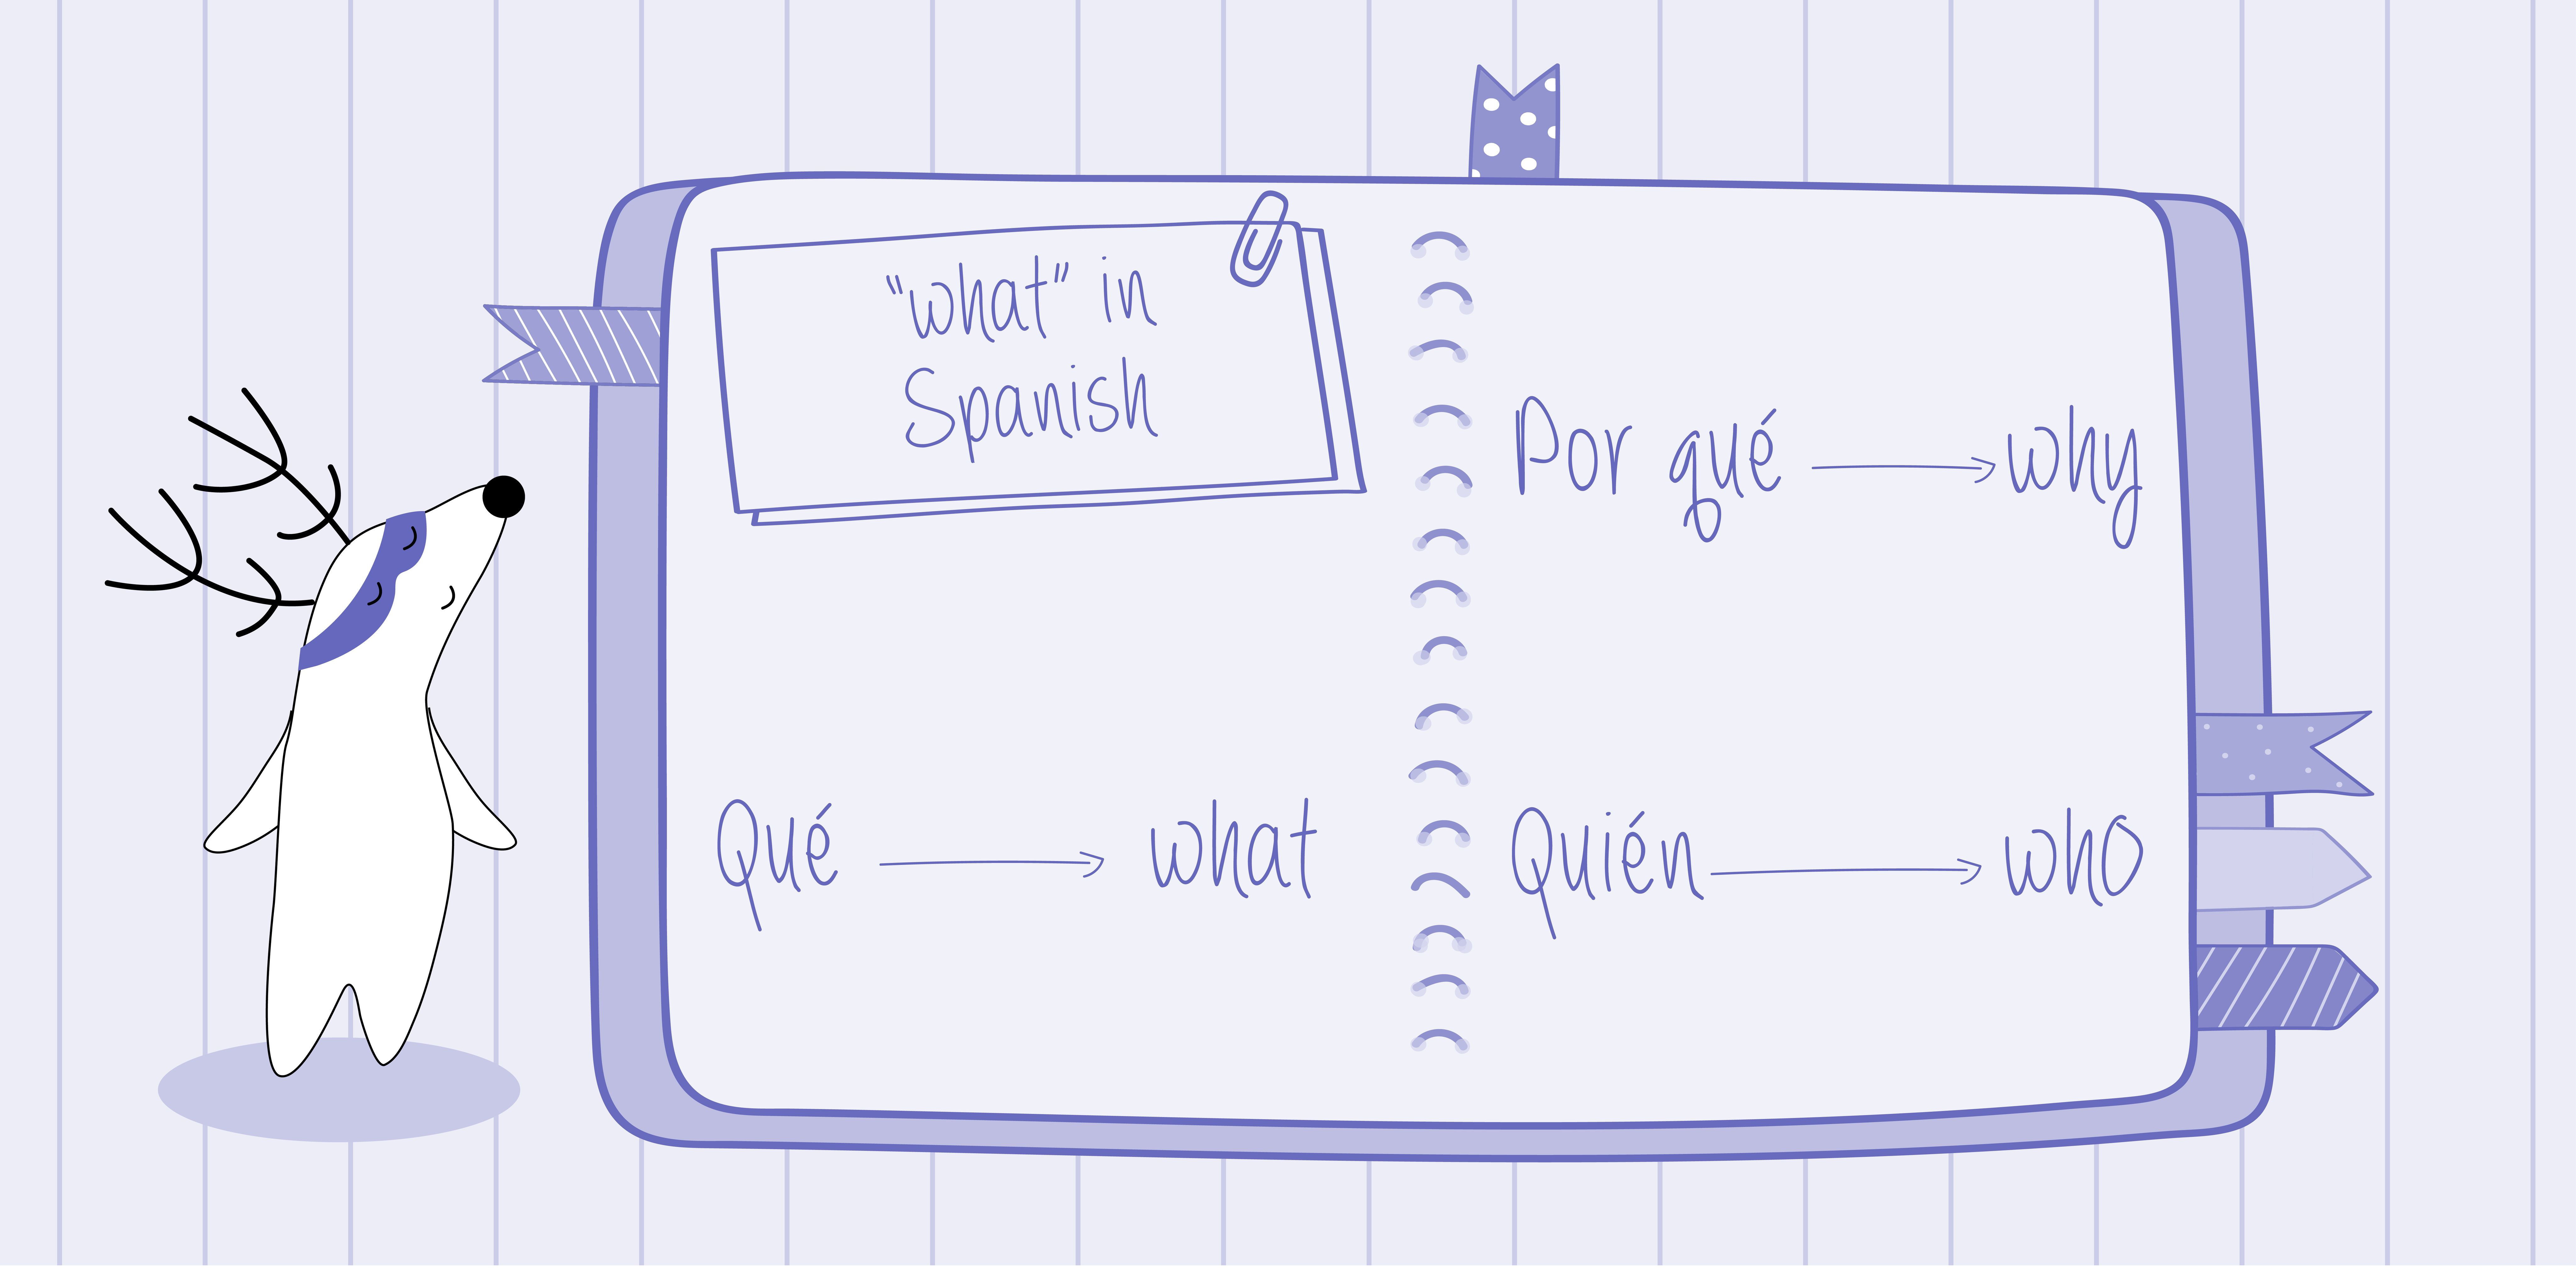 A screenshot of Soren’s notebook, where he noted the following Spanish question words and their English equivalents: 